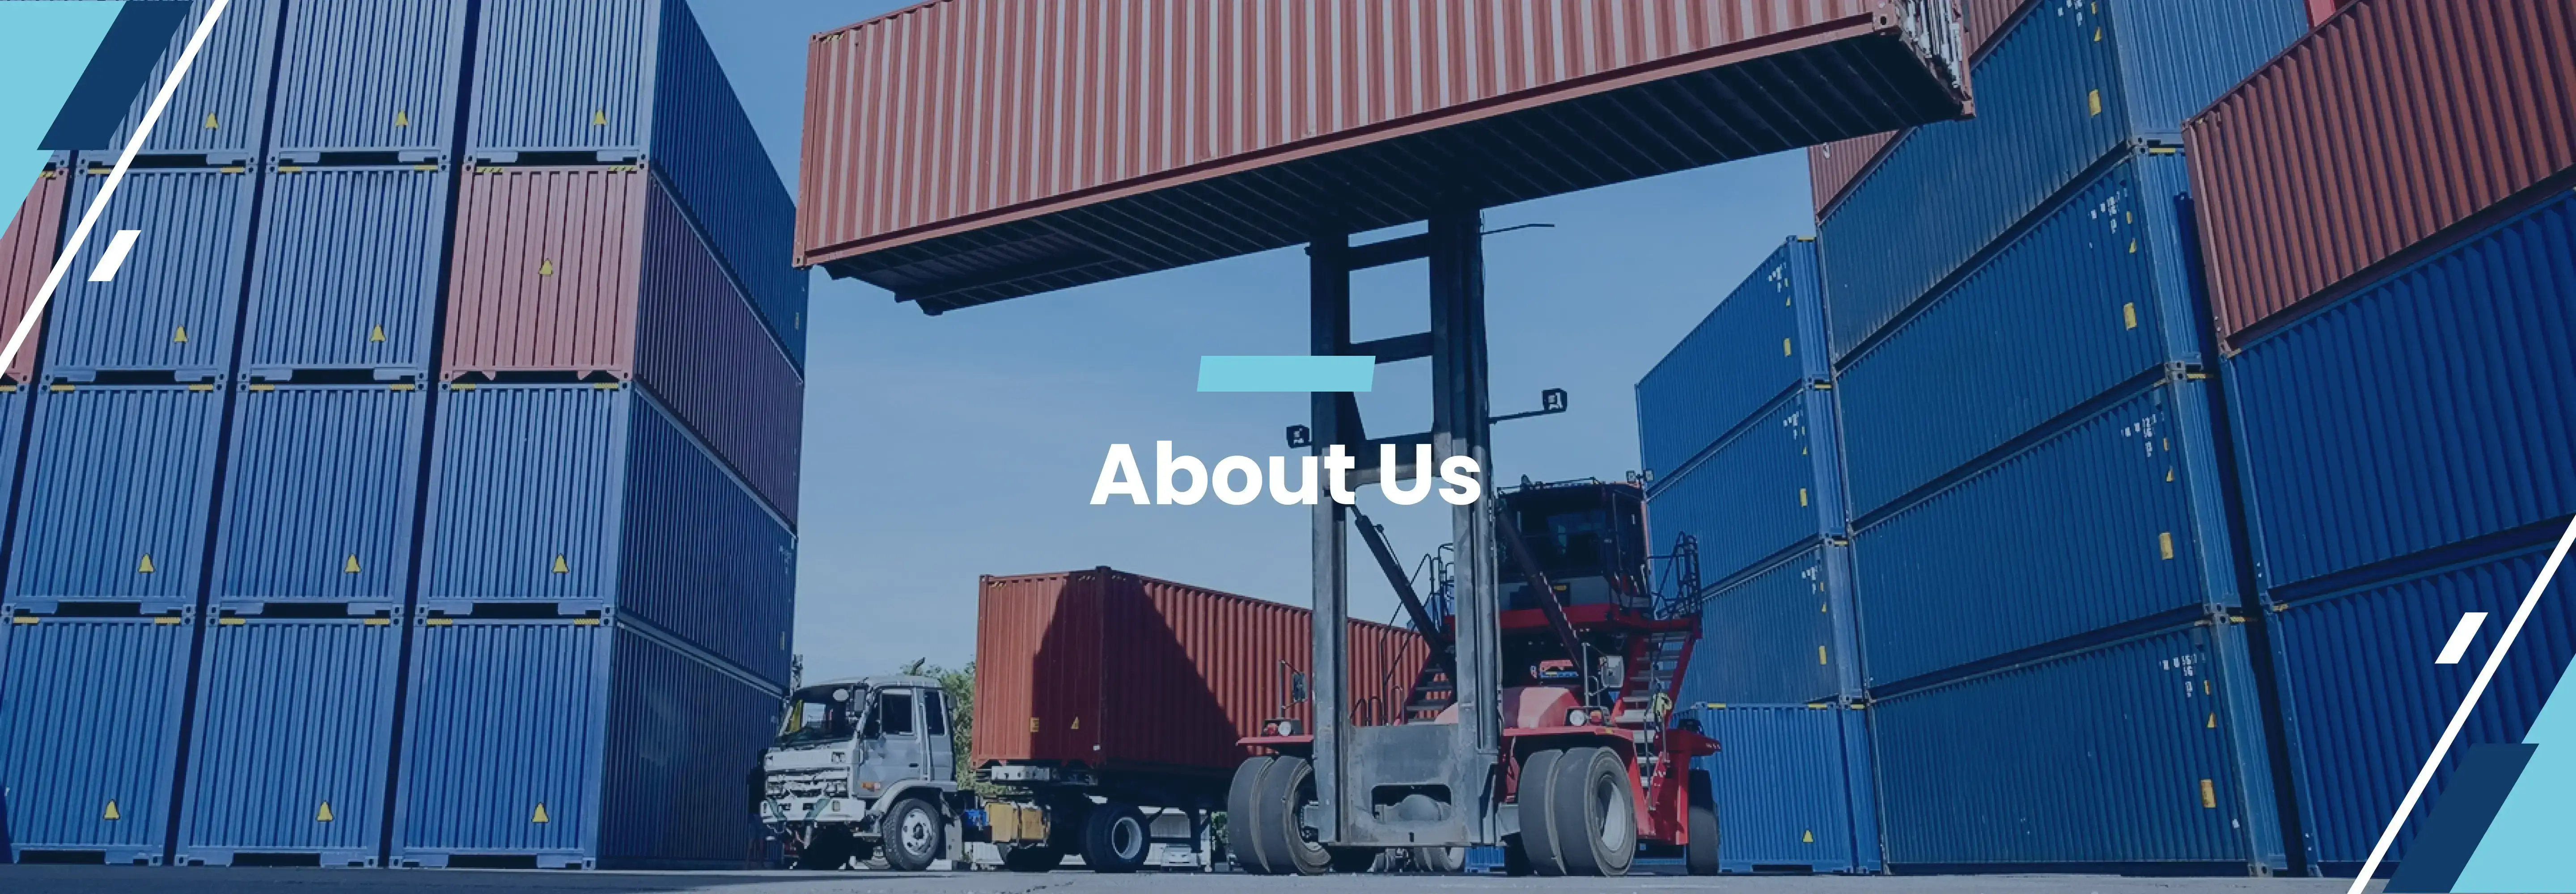 About Container Sree Logistics